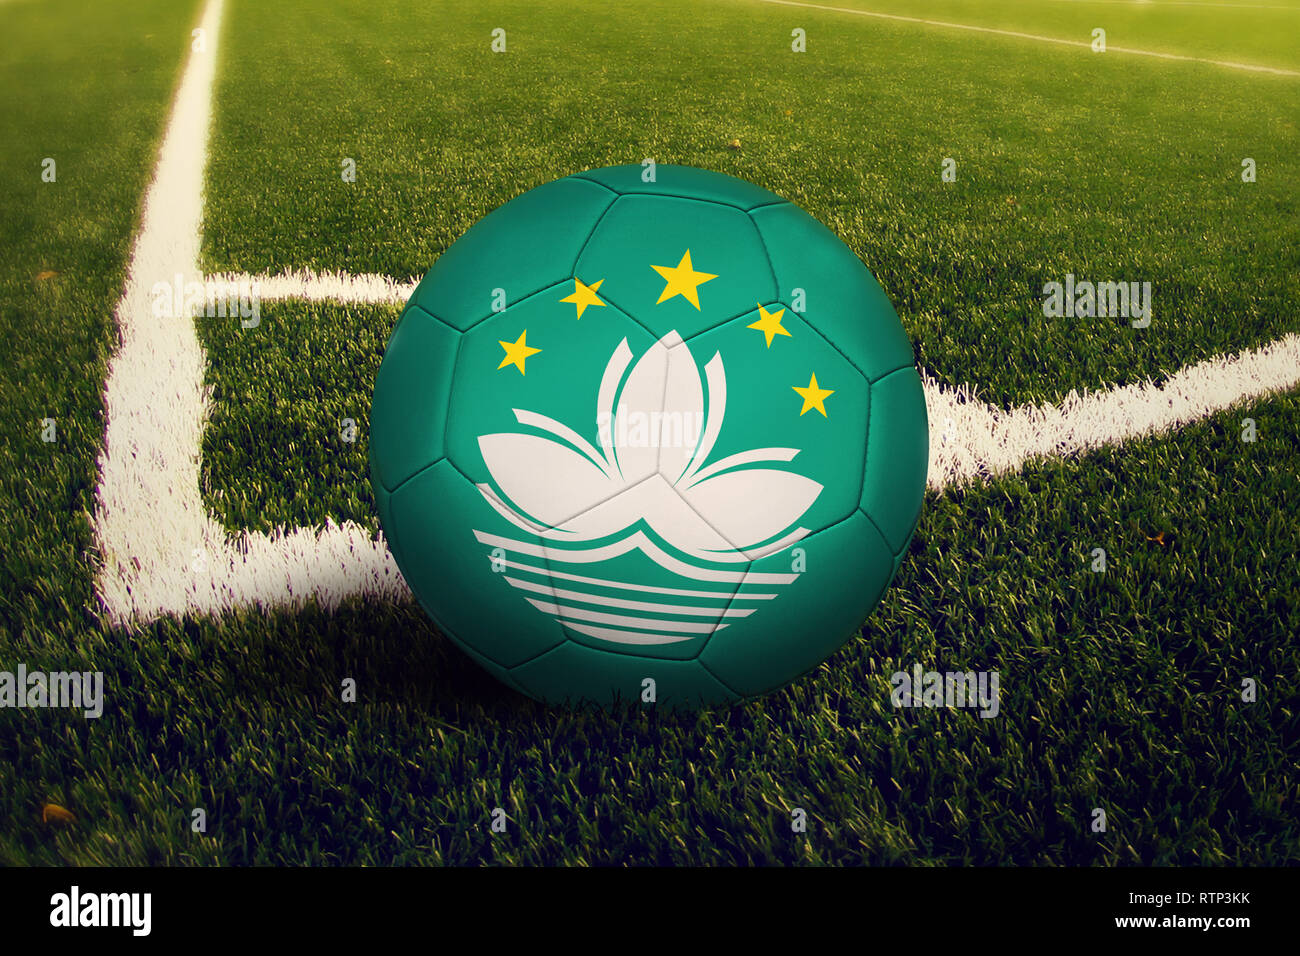 Macao ball on corner kick position, soccer field background. National ...